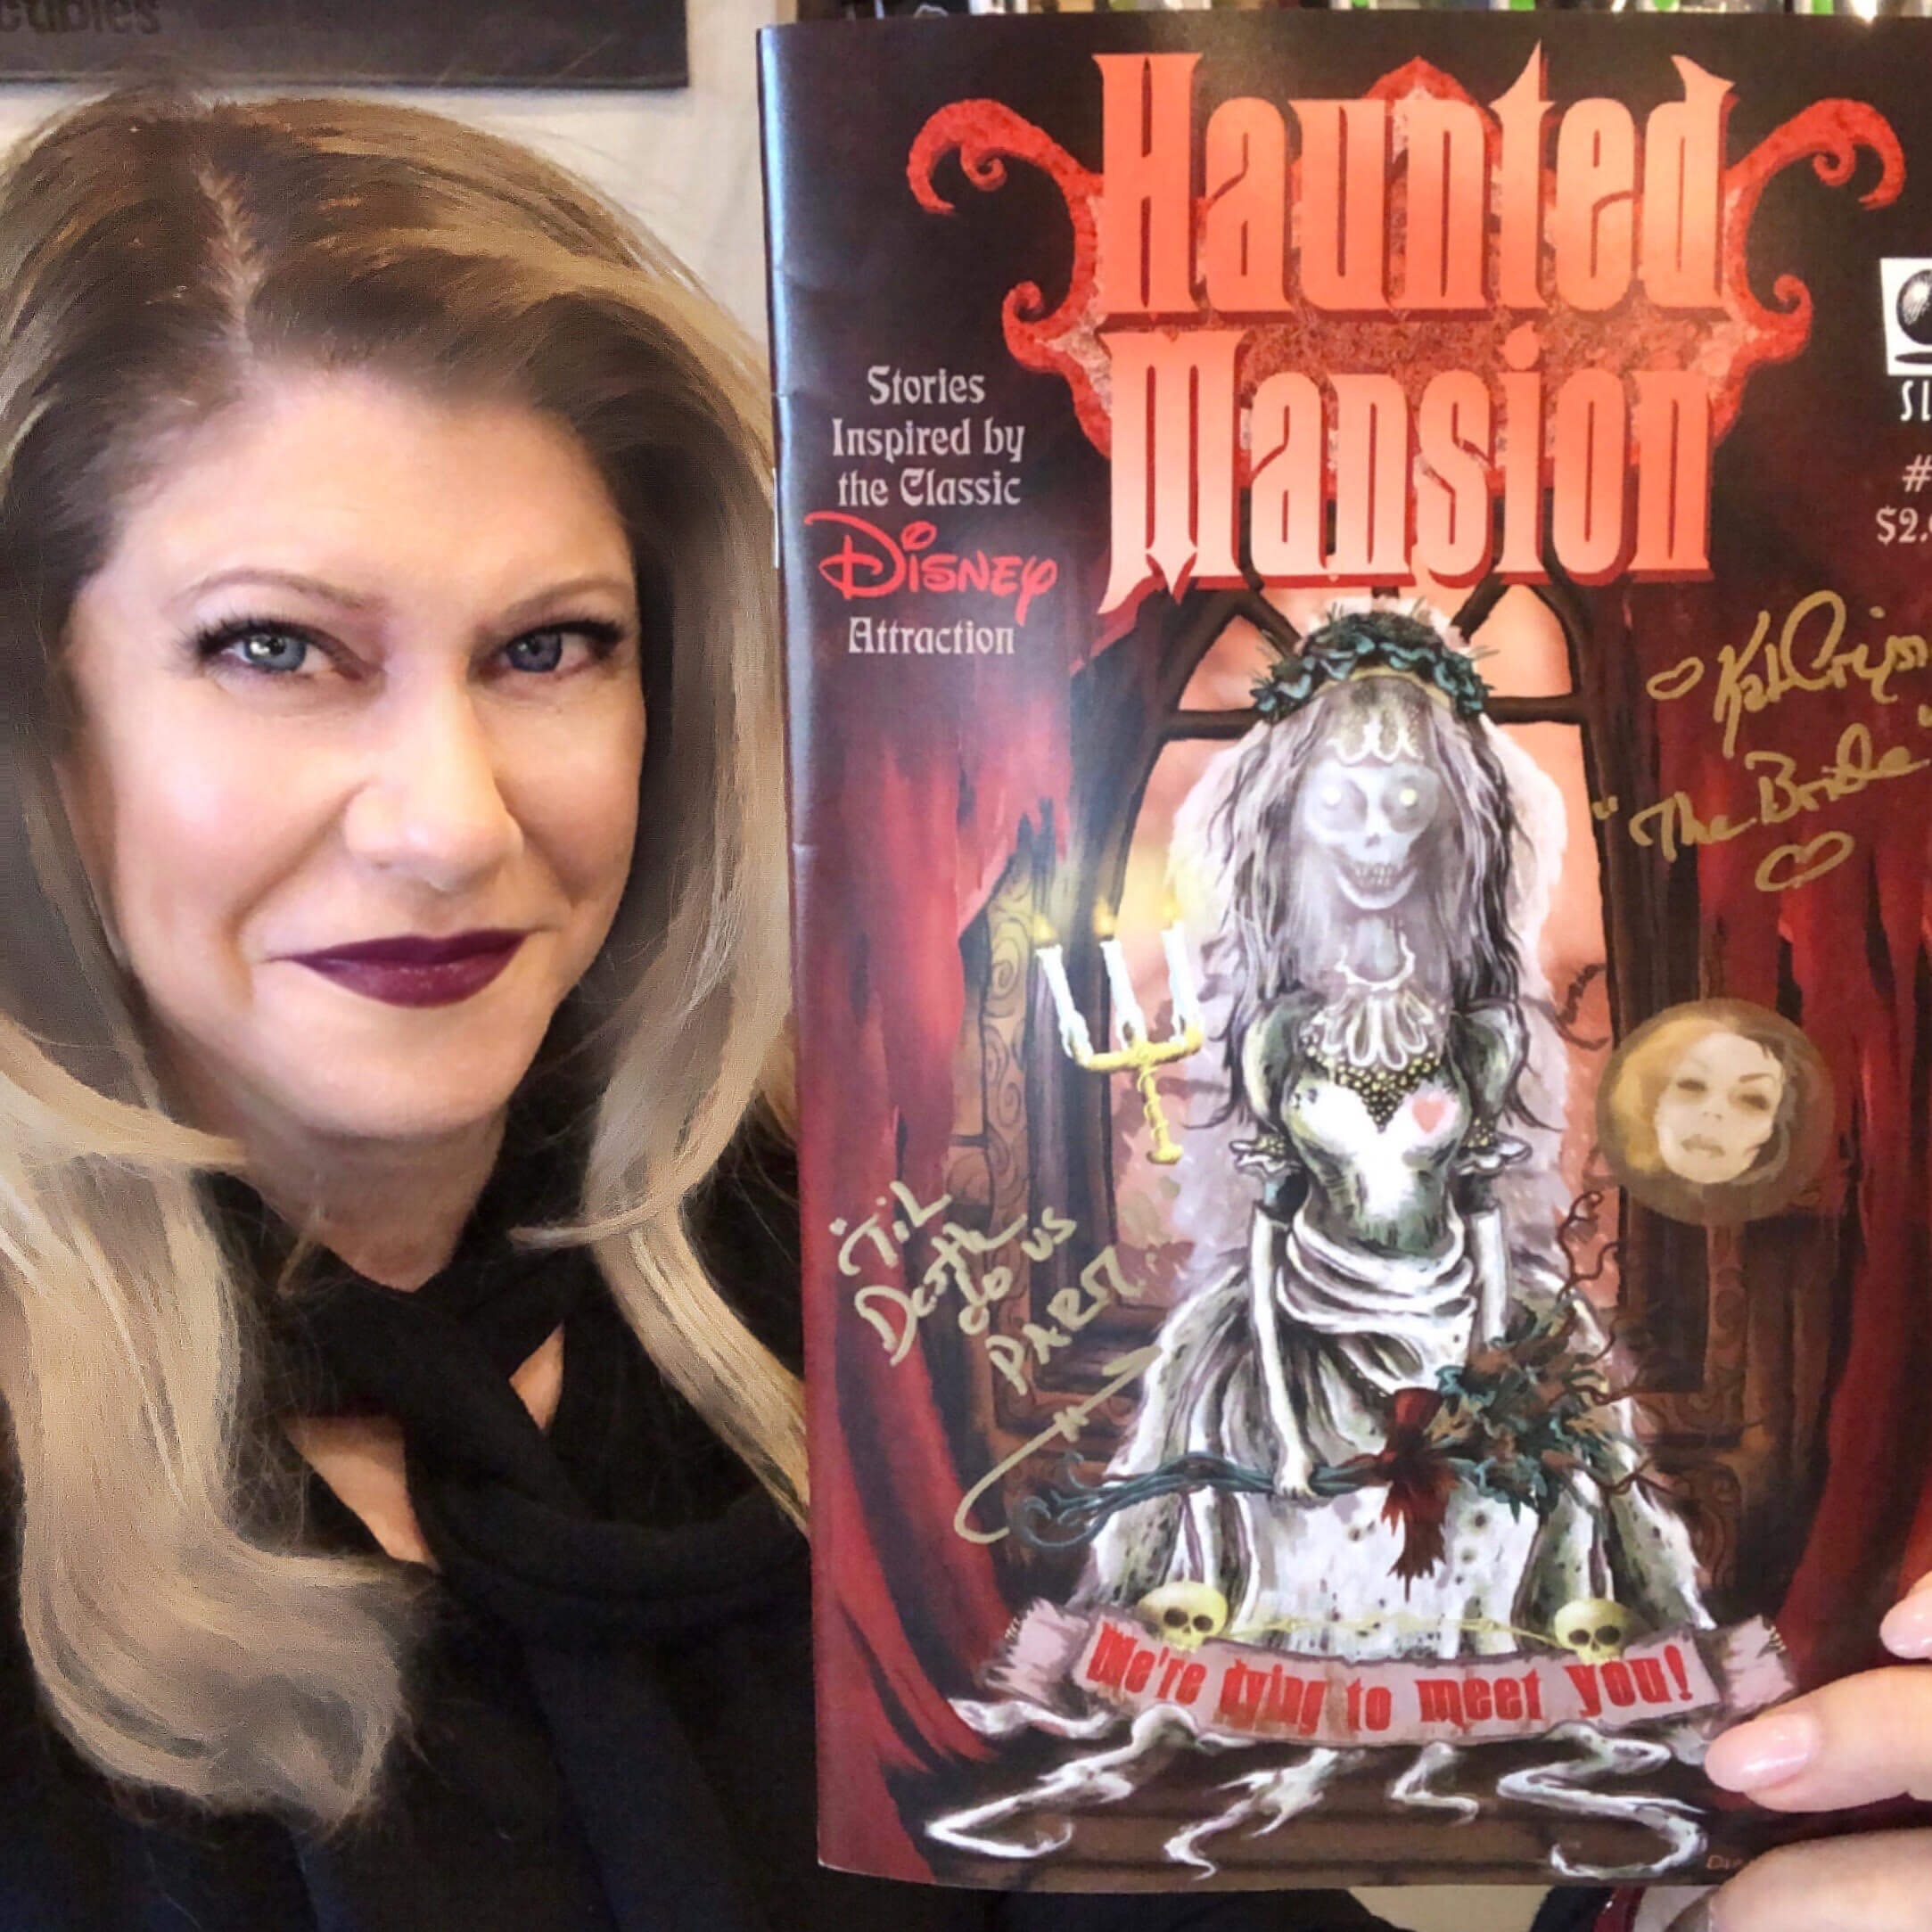 Kat Cressida with autographed Haunted Mansion booklet